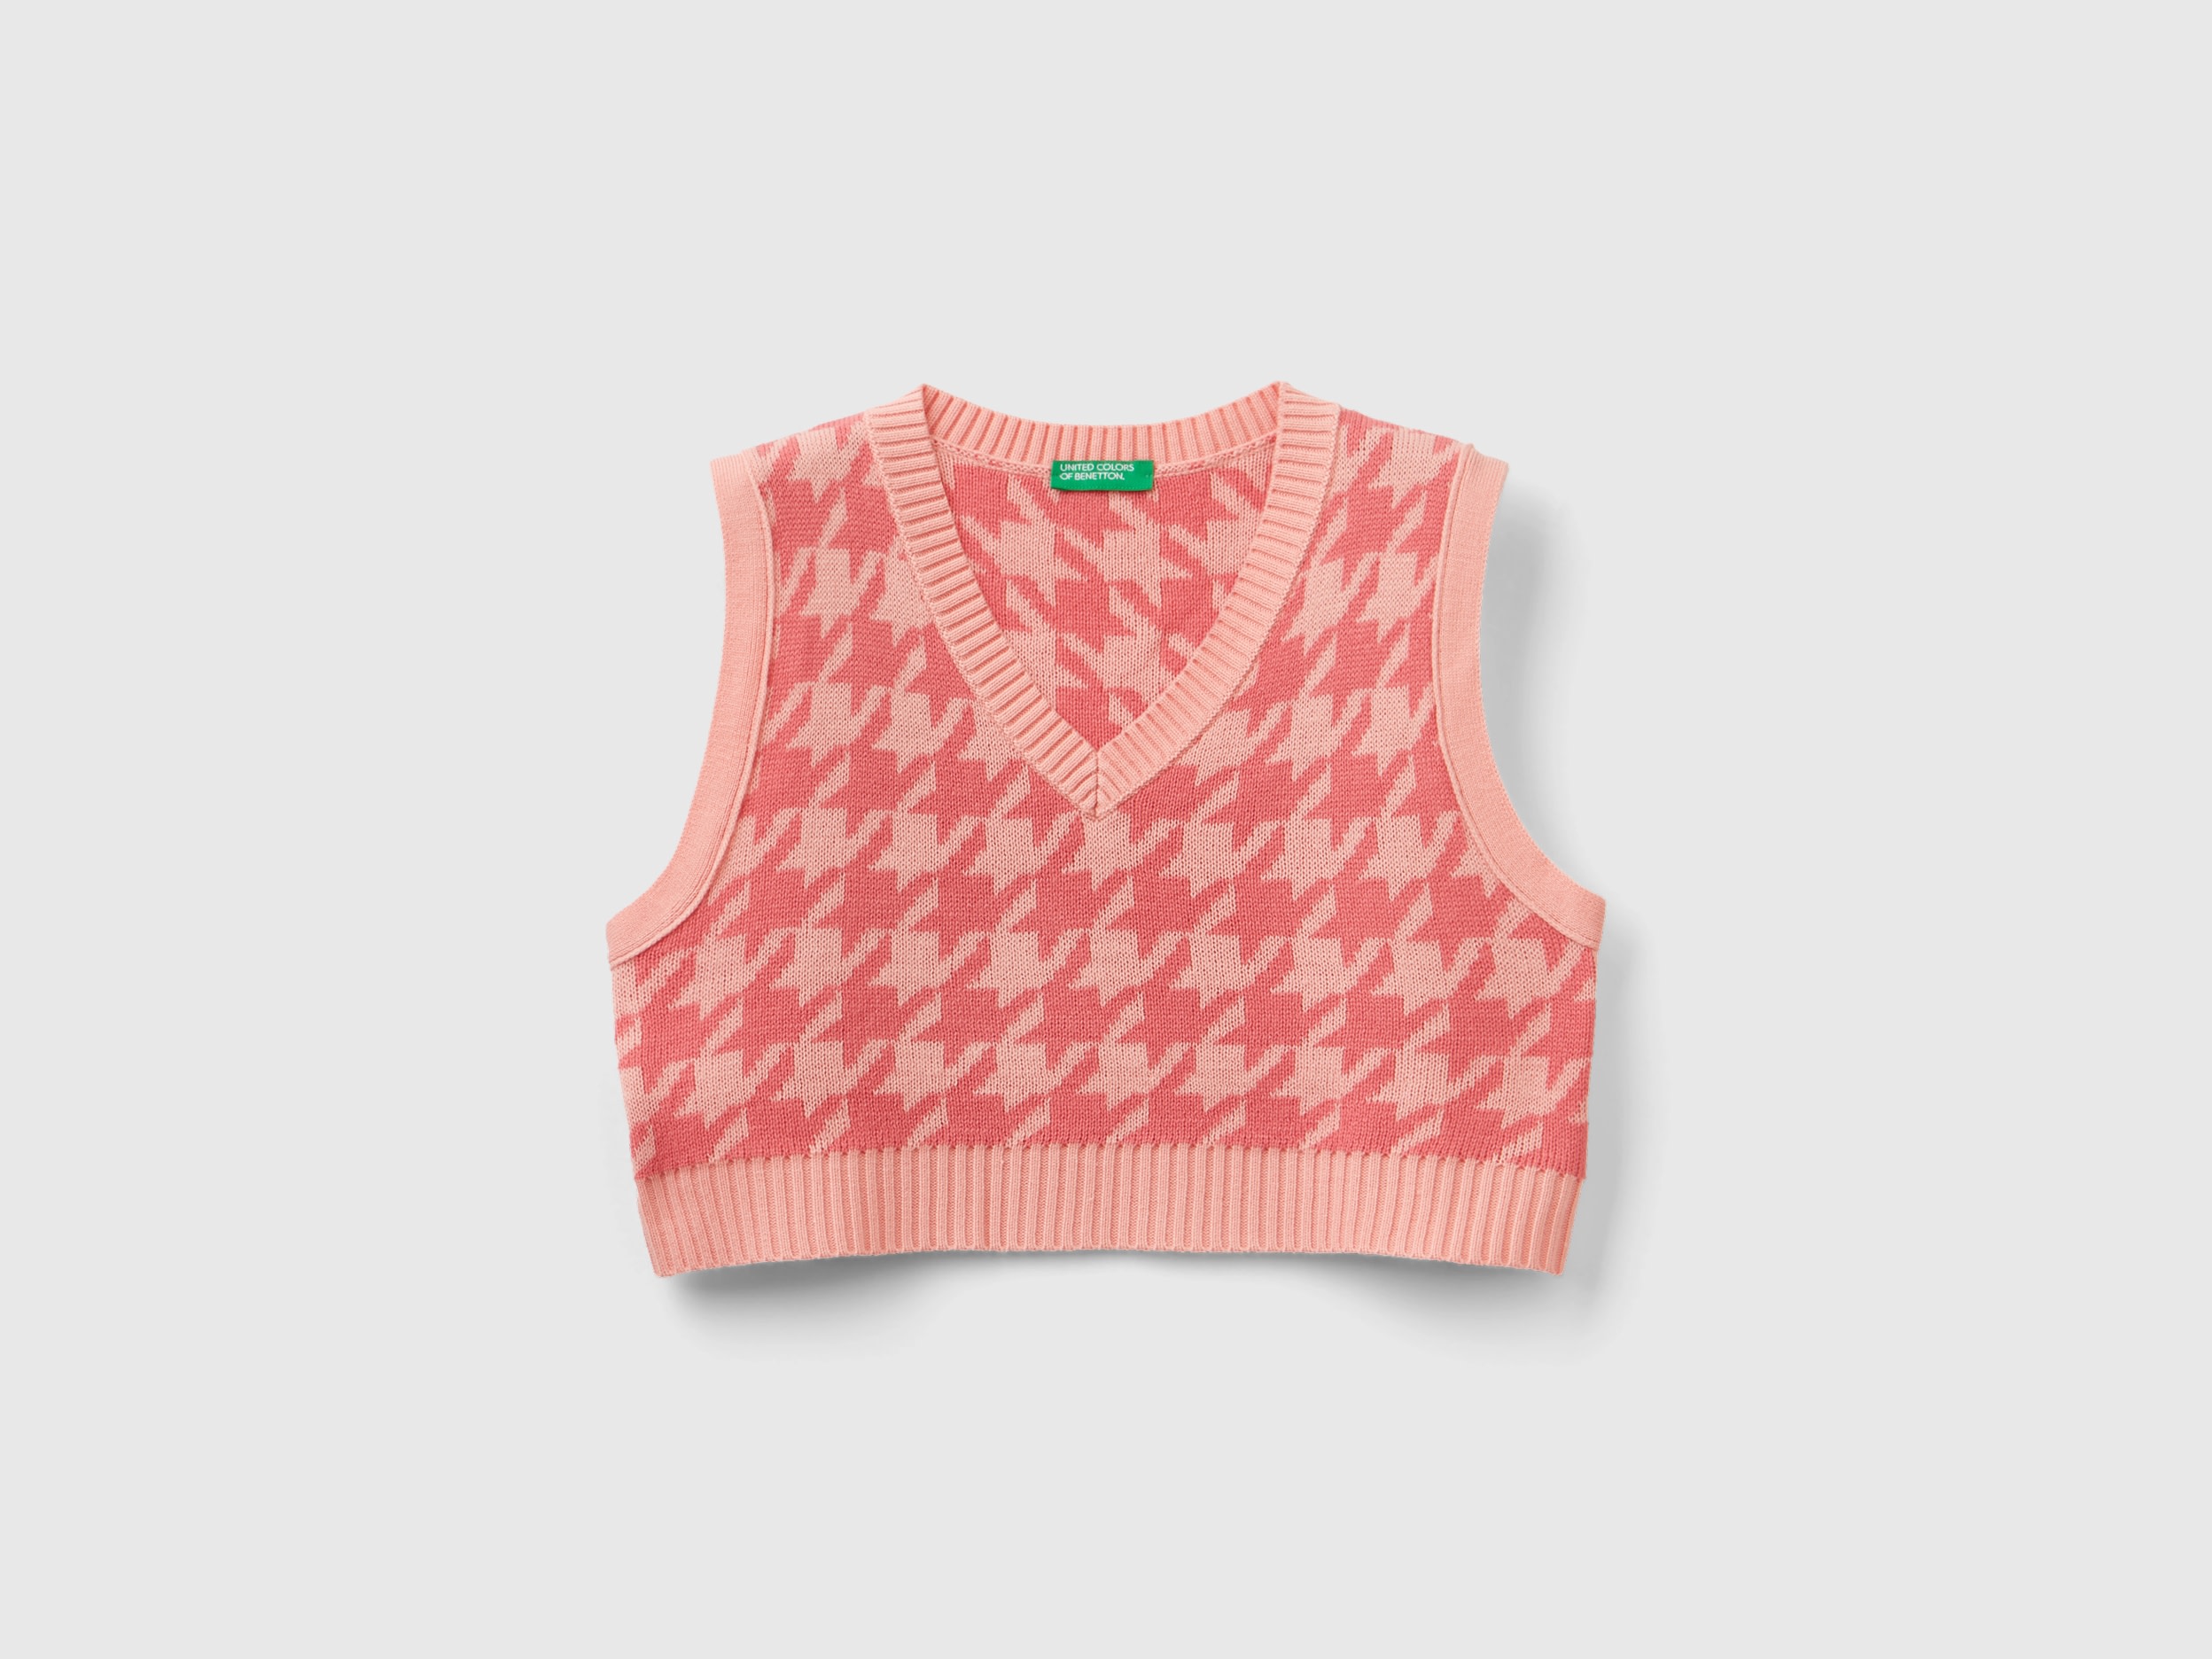 Benetton, Cropped Houndstooth Vest, size 3XL, Pink, Kids